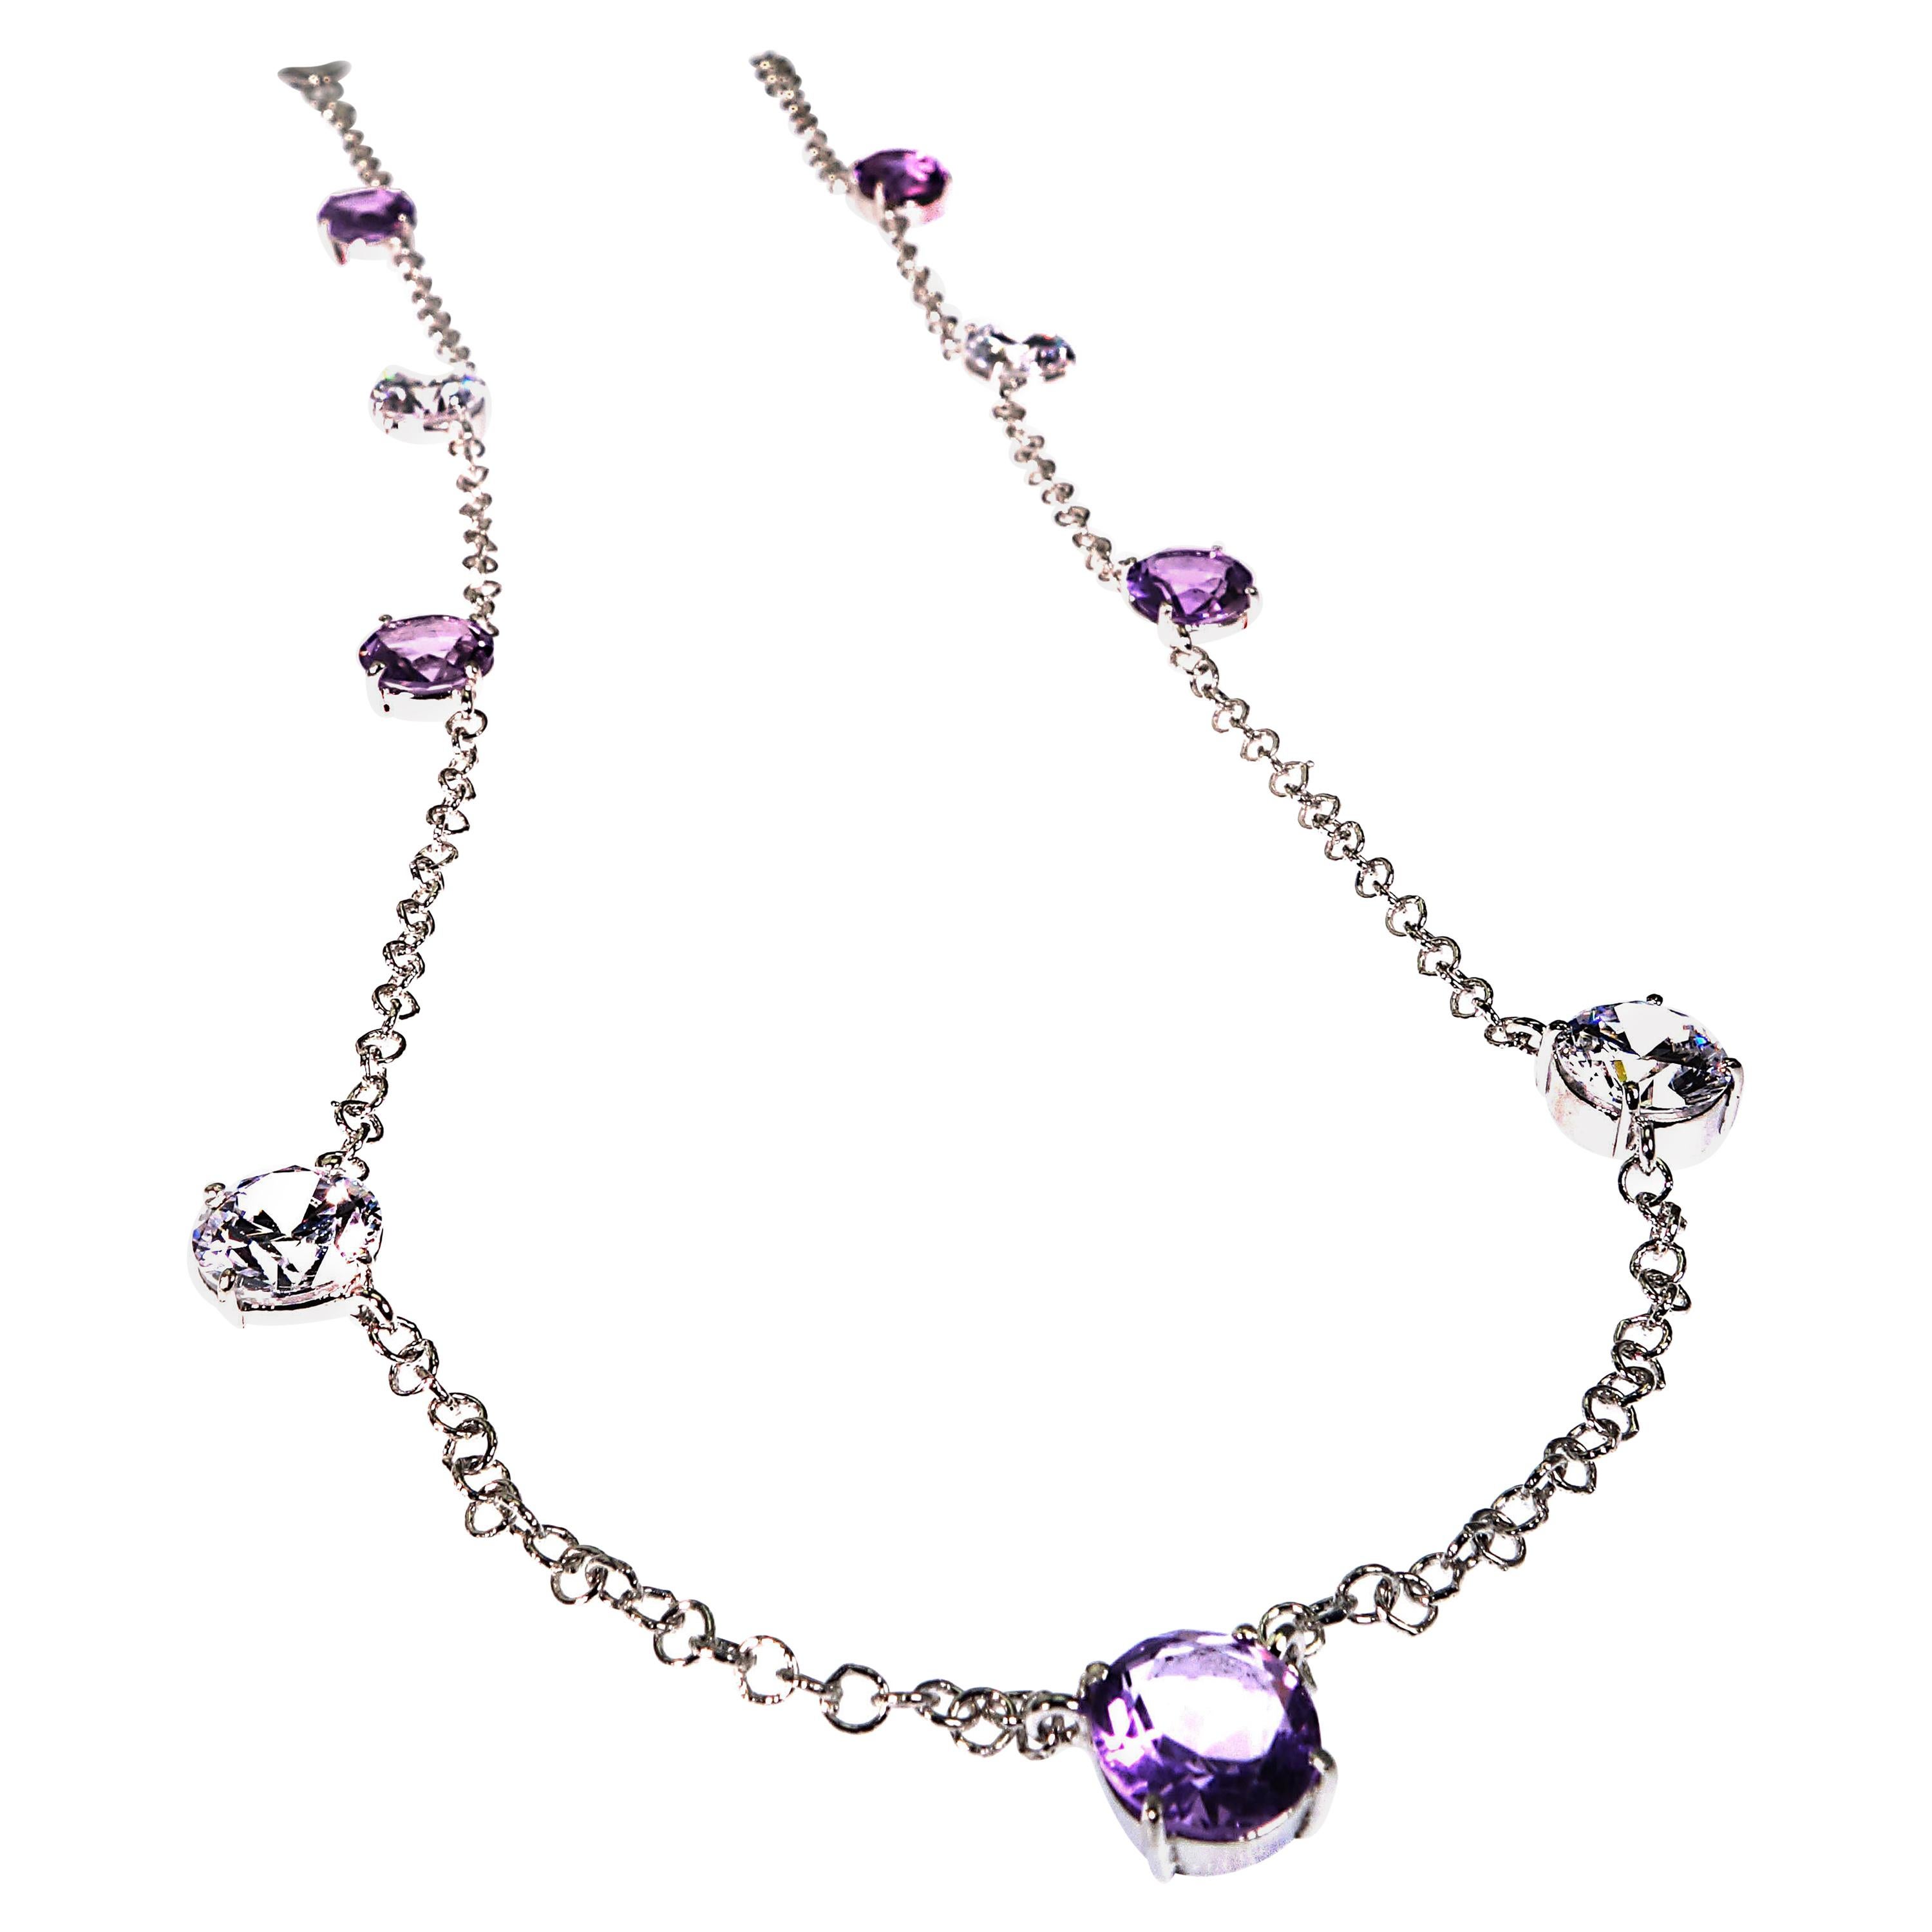 Unique necklace of 5 stations of 8 MM Amethyst alternating with 4 stations of 8 MM Sparkling White genuine Zircons.  The 14K white gold rhodium plated Sterling Silver chain upon which they are mounted is just the right amount of silver to enhance